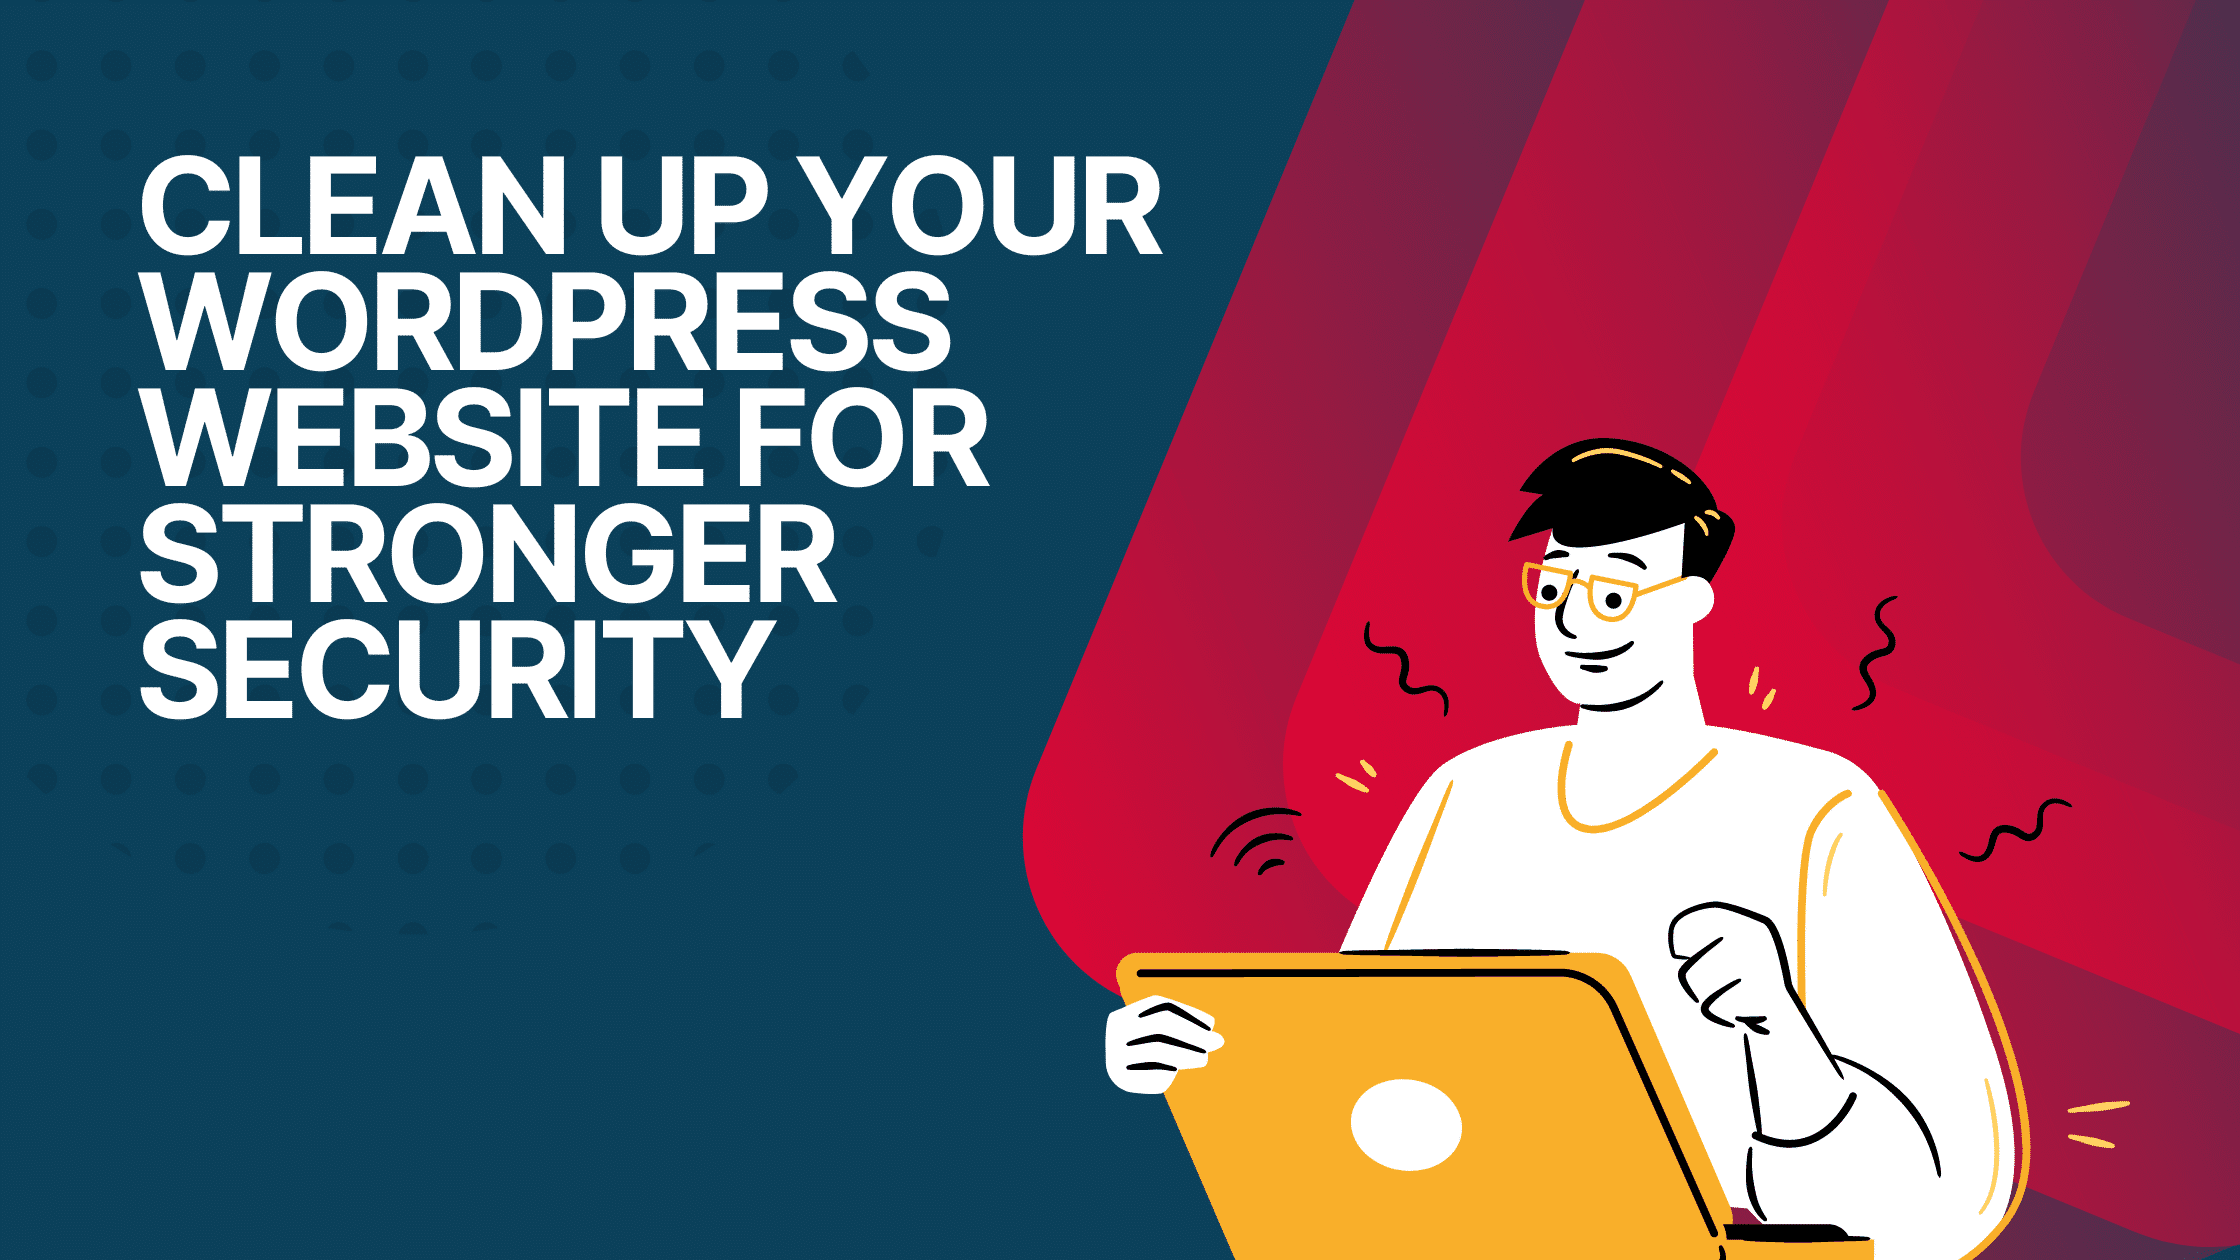 This image is showing how to improve the security of a WordPress website by cleaning it up.